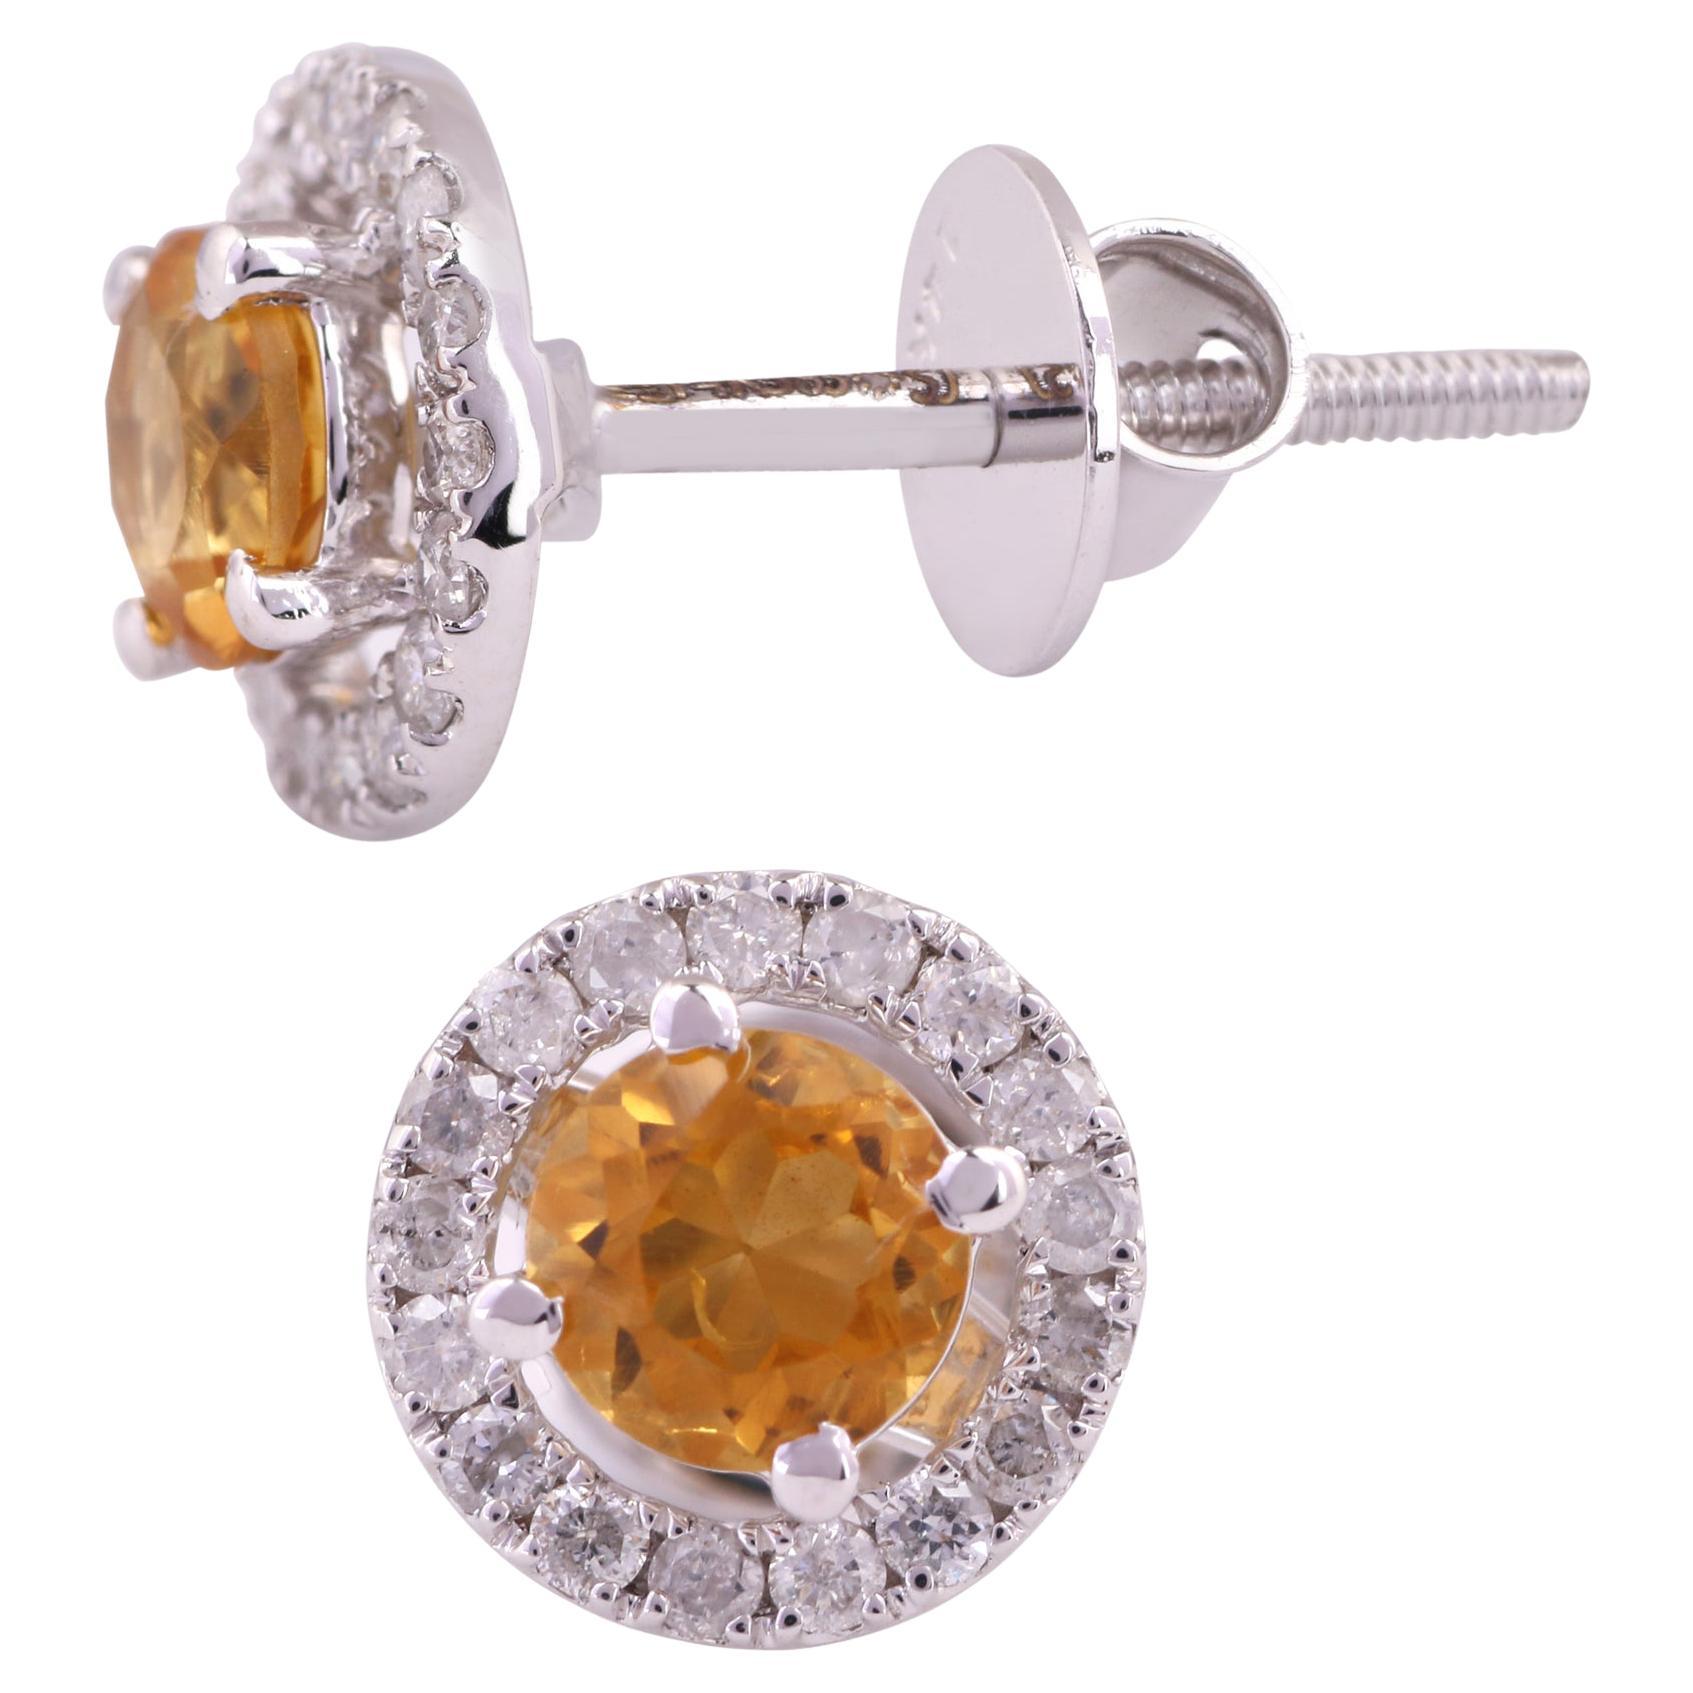 14K White Gold 0.335 Ctw Diamond, 0.762 Ctw Natural Citrine Round Stud Earrings For Sale